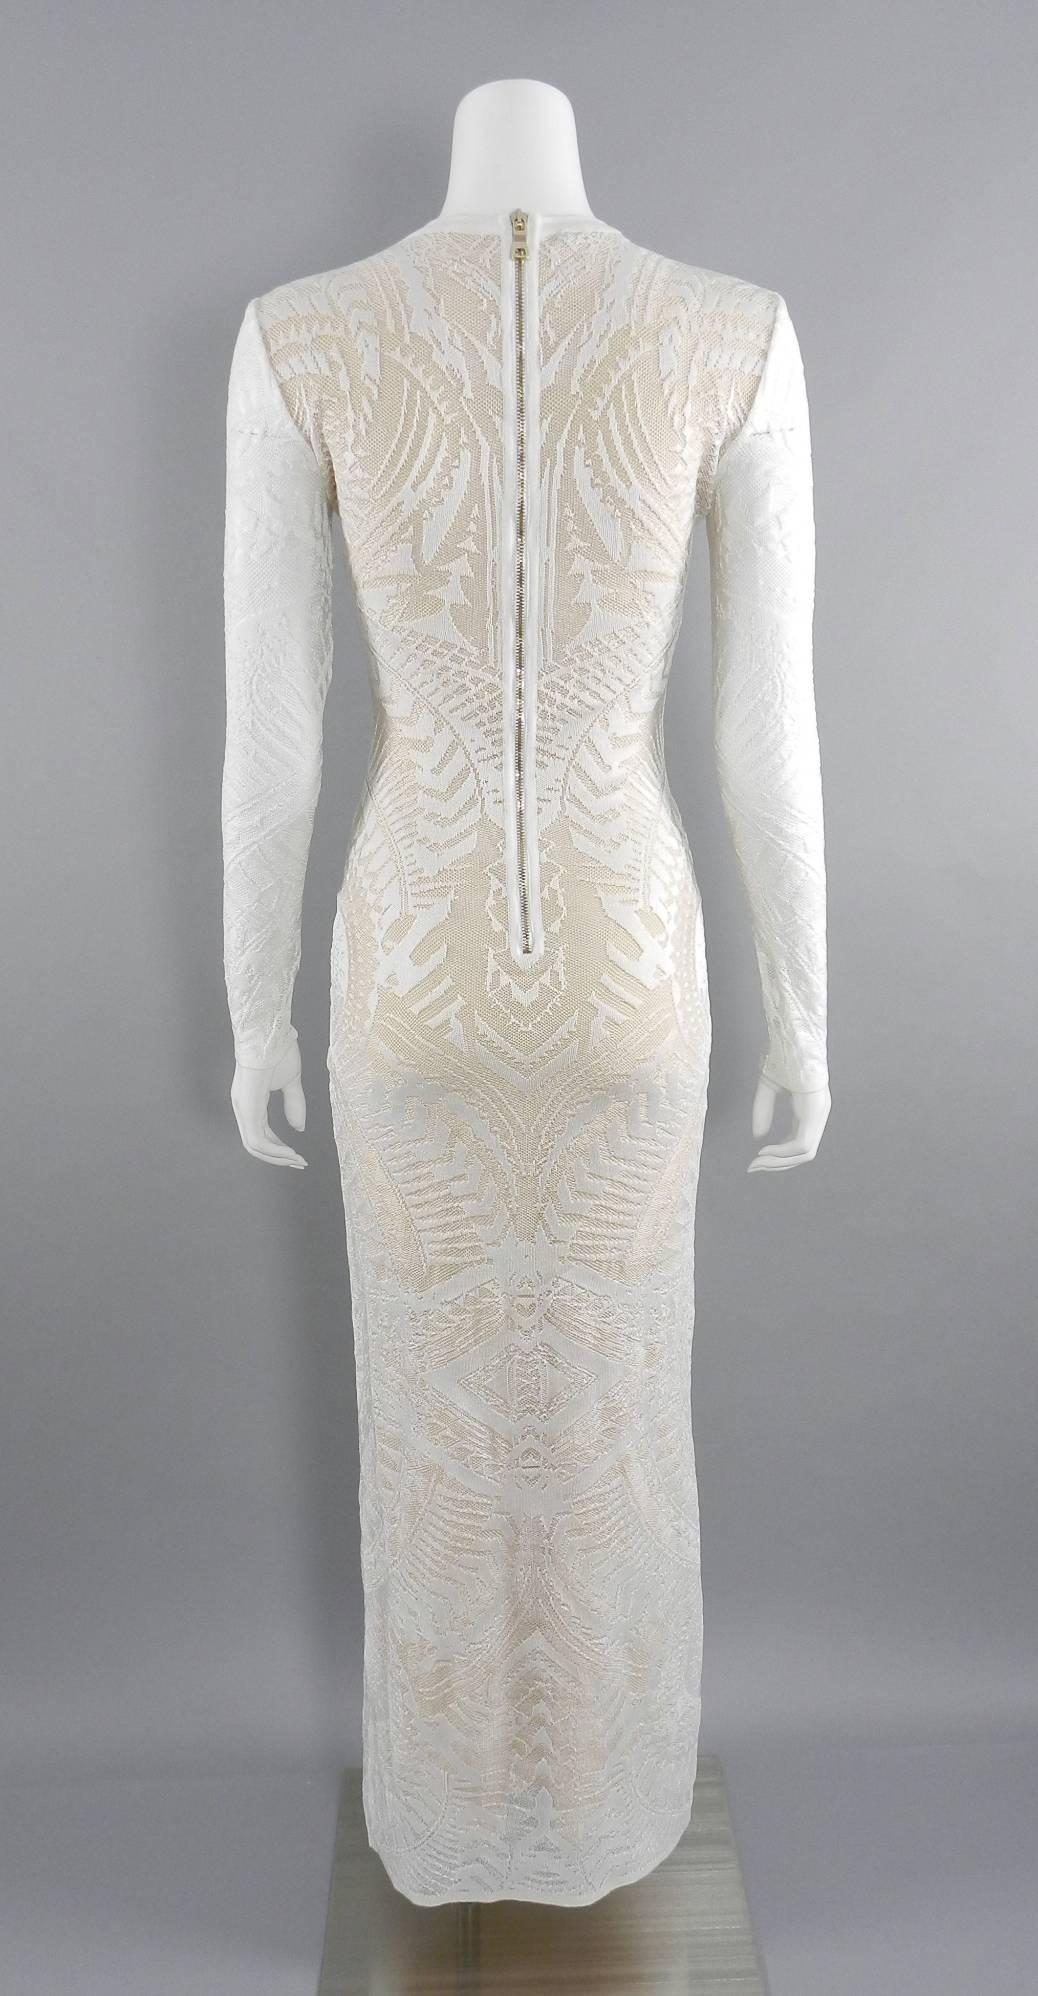 Balmain long white lace stretch dress with nude lining.  Centre back gold metal zipper and long sheer sleeves.  Tagged size FR 38 (USA 6). Stretchy knit tube dress so flexible but recommended measurements are as follows:

Bust:  32